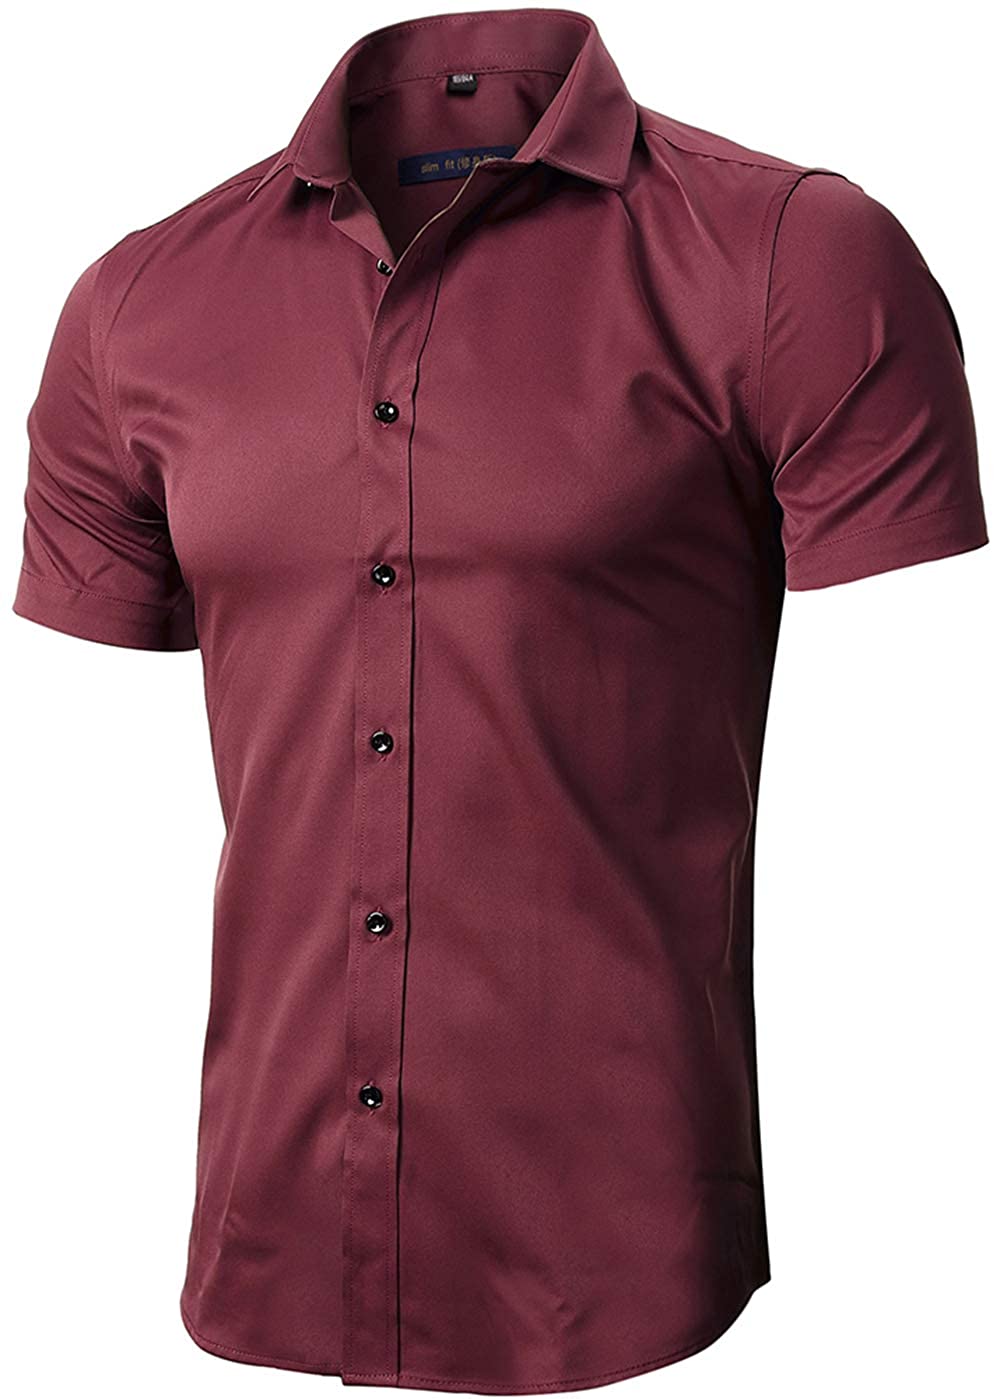 FLY HAWK Mens Dress Shirts Fitted Bamboo Fiber Short Sleeve Elastic Casual Button Down Shirts 